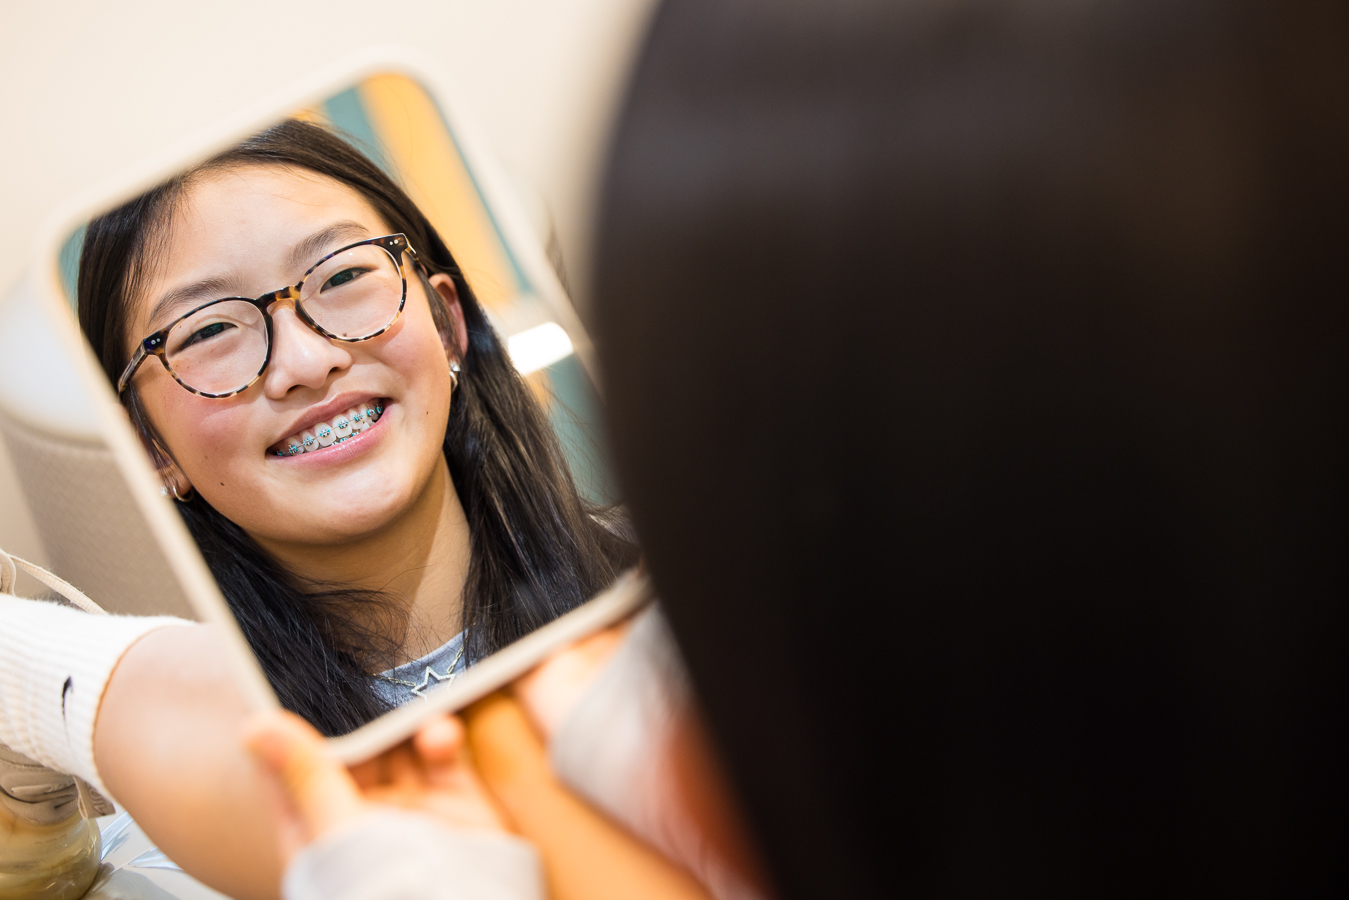 pa branding photographer, lisa rhinehart, captures this creative unique portrait of this patient looking at herself in the mirror smiling while looking at her braces during her orthodontist appointment at west chester orthodontics 